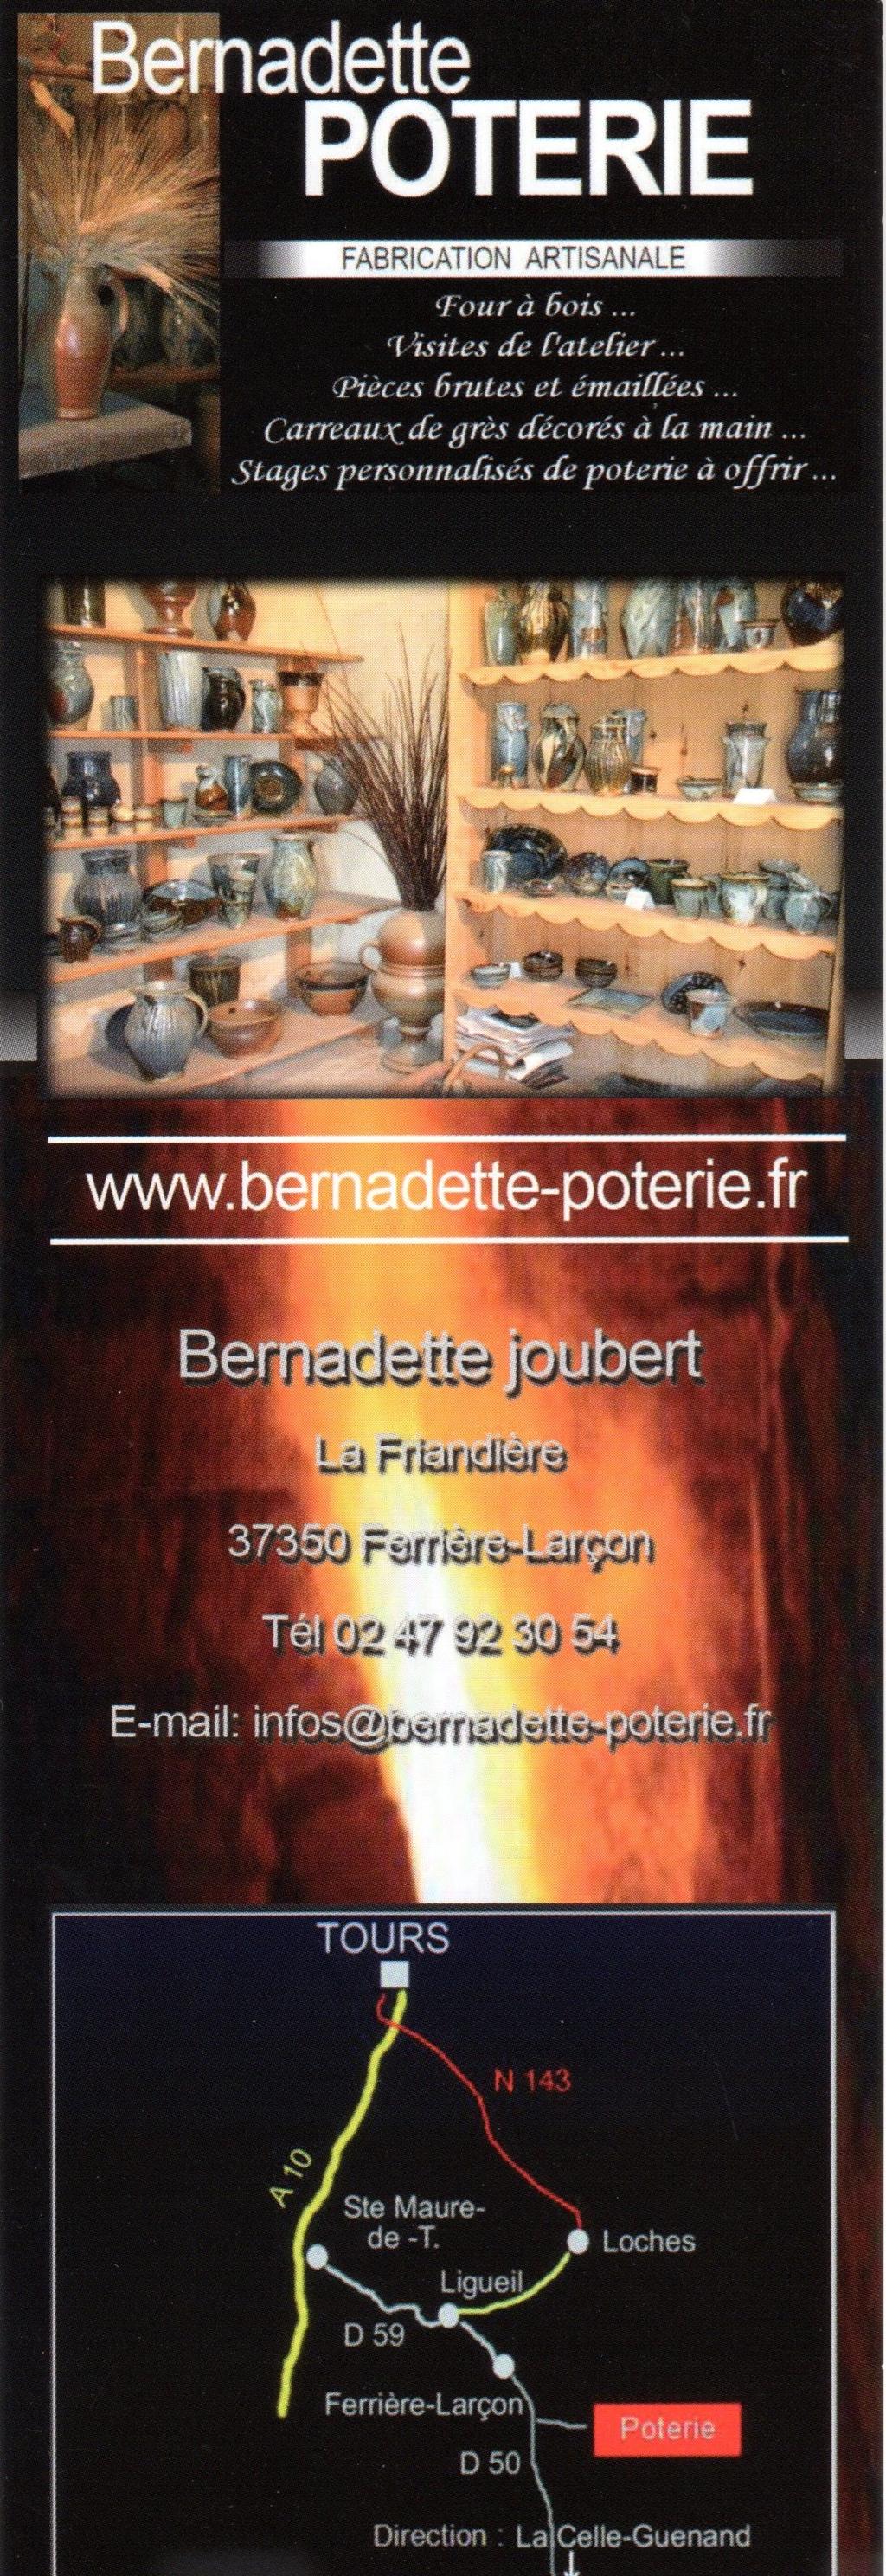 Bernadette s Pottery is just 10 minutes to the North of La Richardière at the junction before Ferriere-Larcon. You will be given a warm welcome and a tour of the Pottery Shgow room.